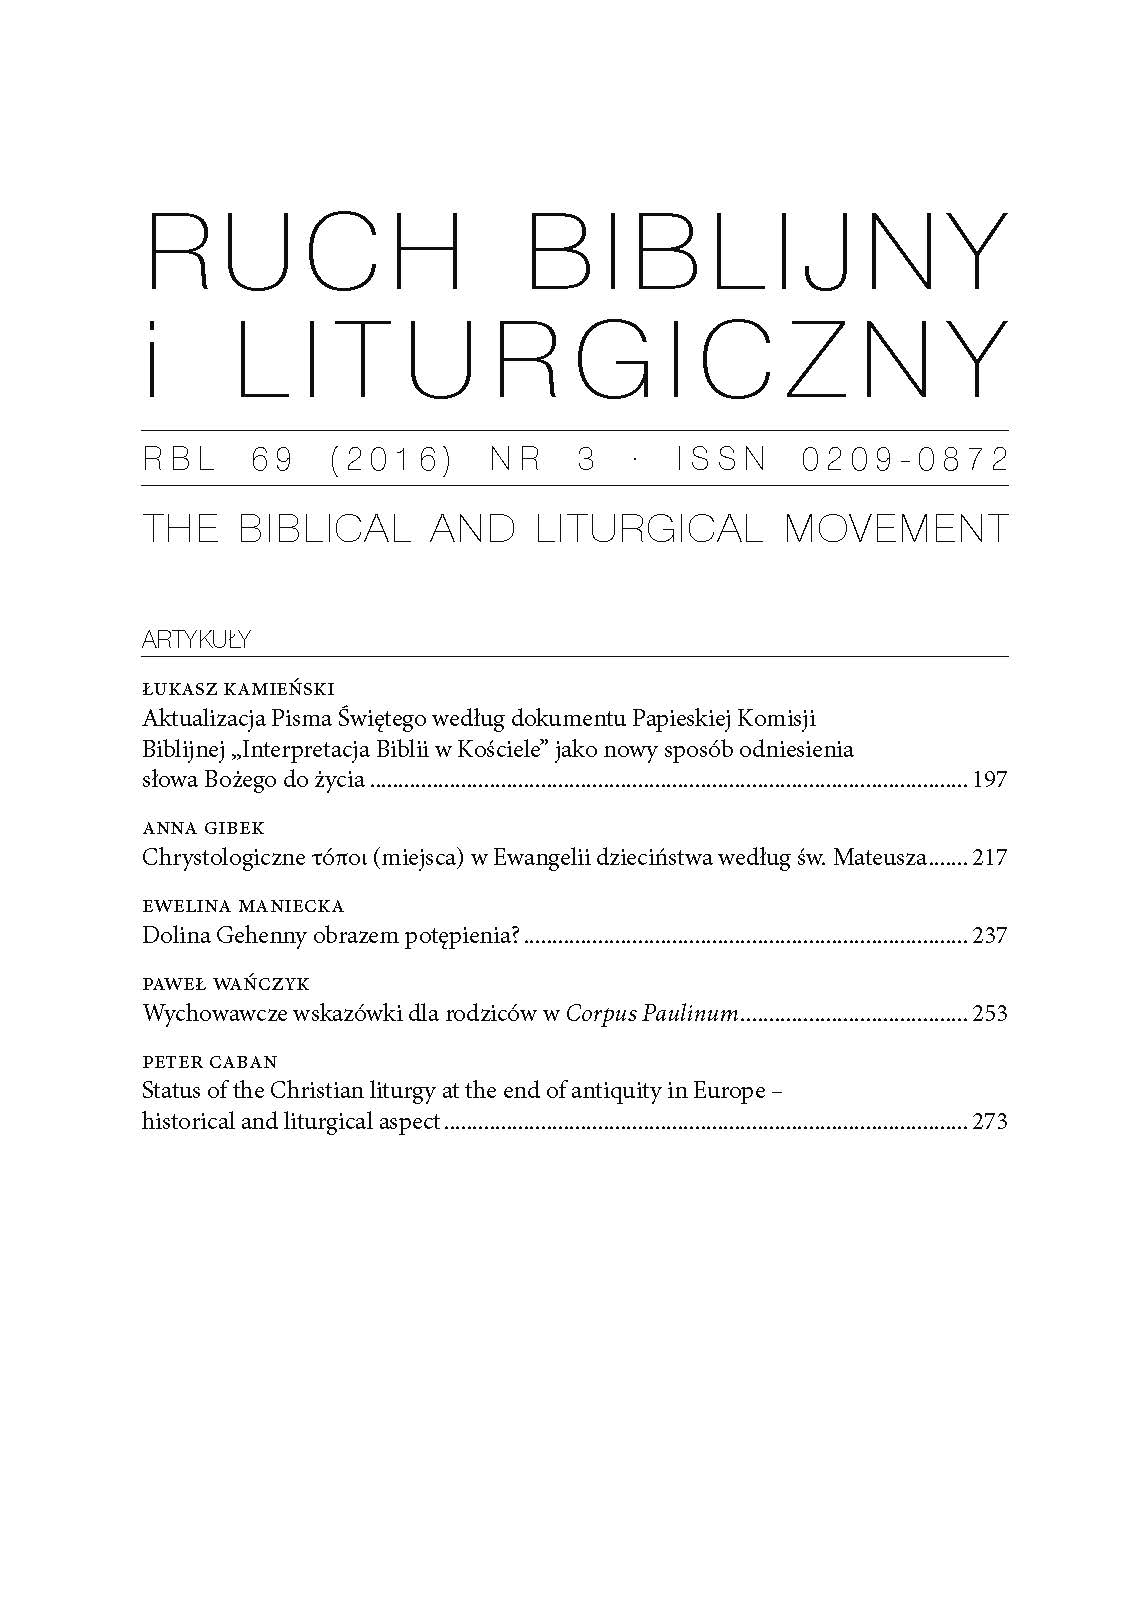 Report of the President of the Theological Polish Society for 2008 Cover Image